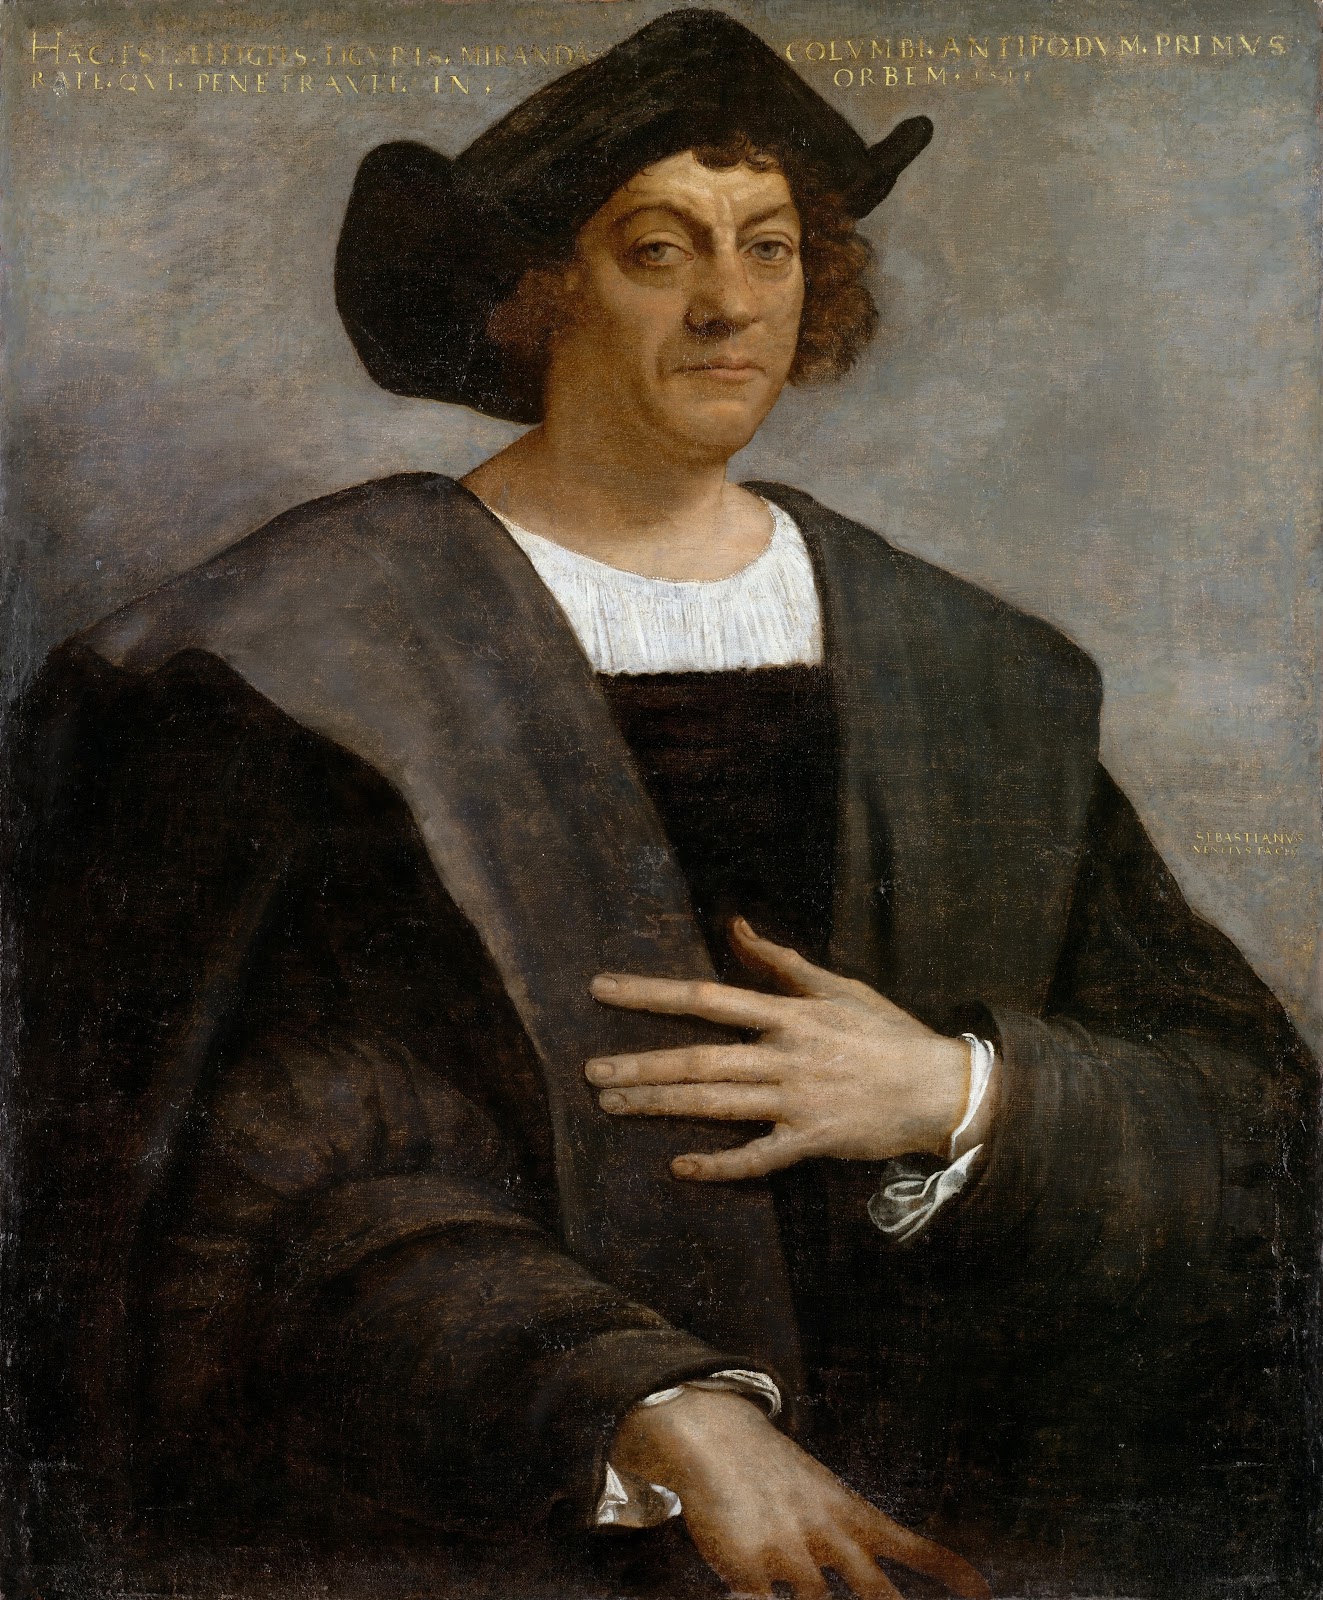 Portrait_of_a_Man,_Said_to_be_Christopher_Columbus.jpg